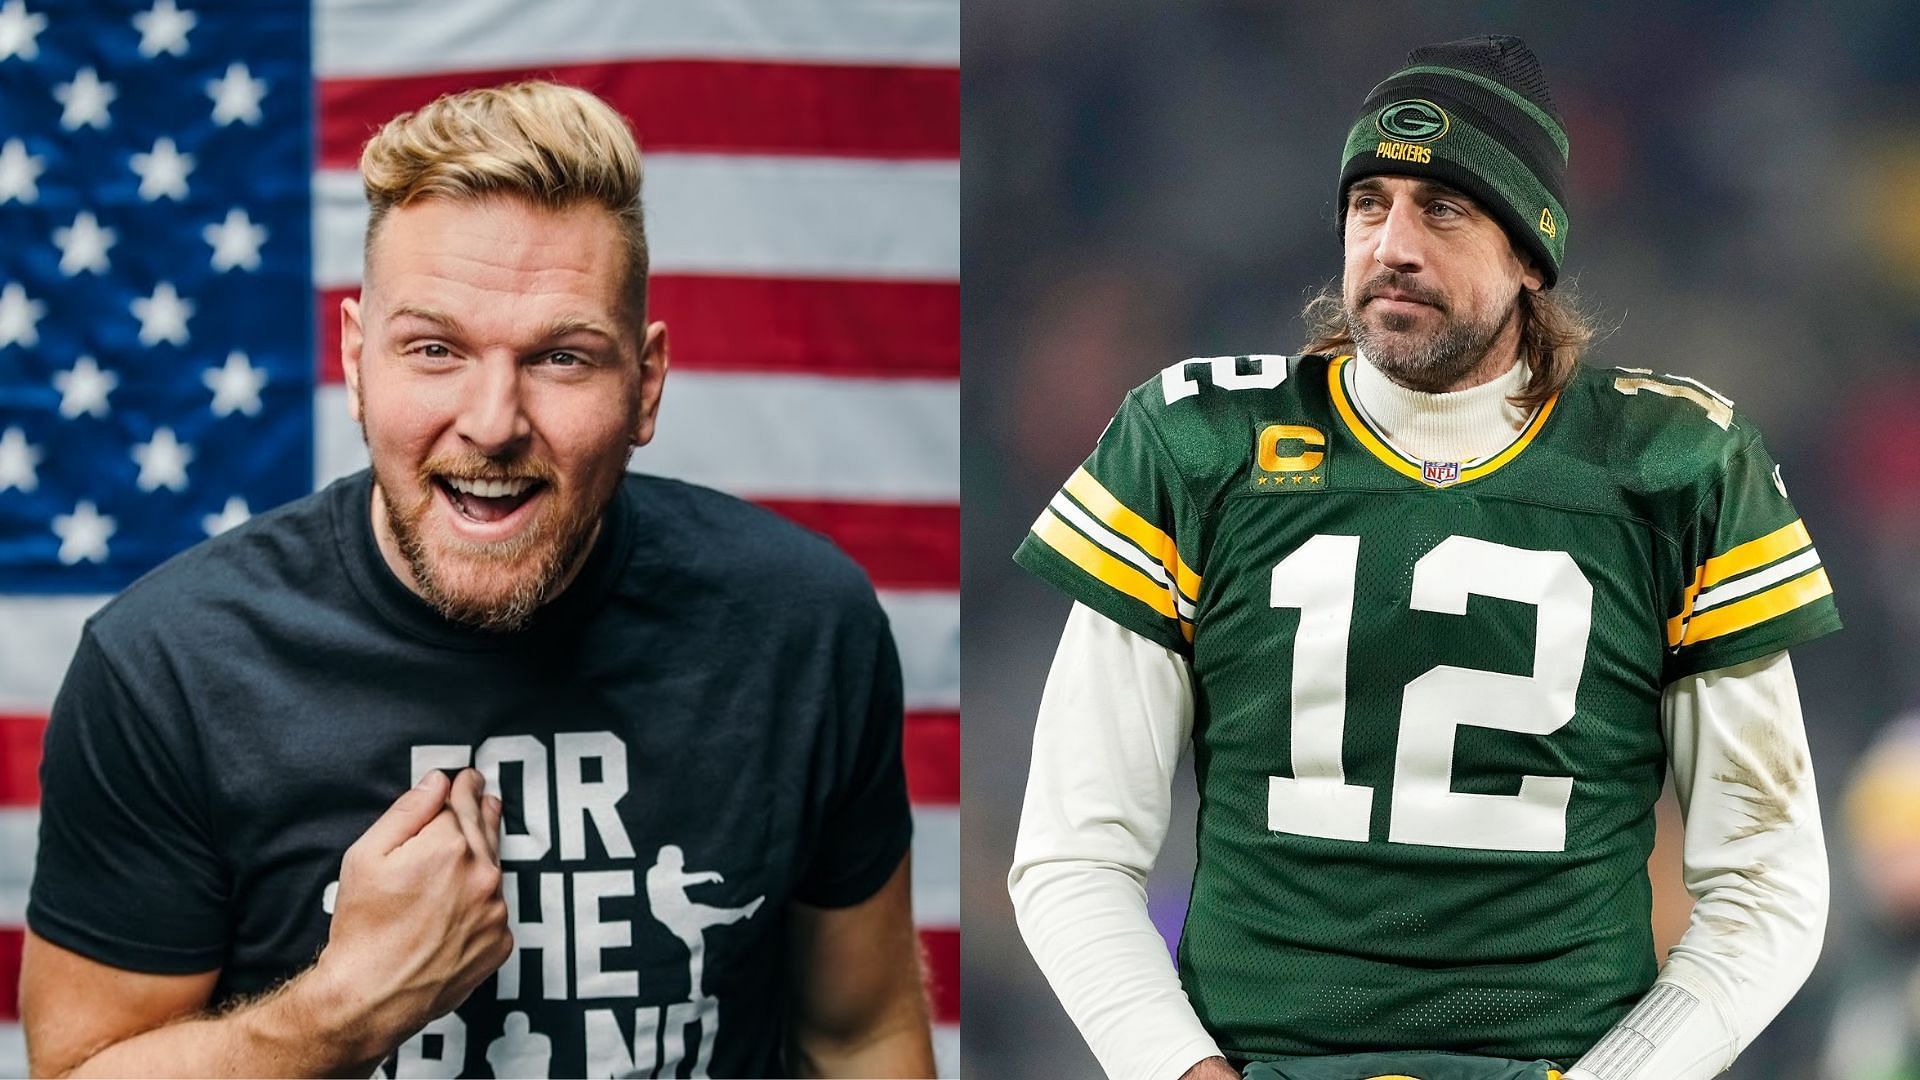 Podcaster Pat McAfee (l) and QB Aaron Rodgers (r)